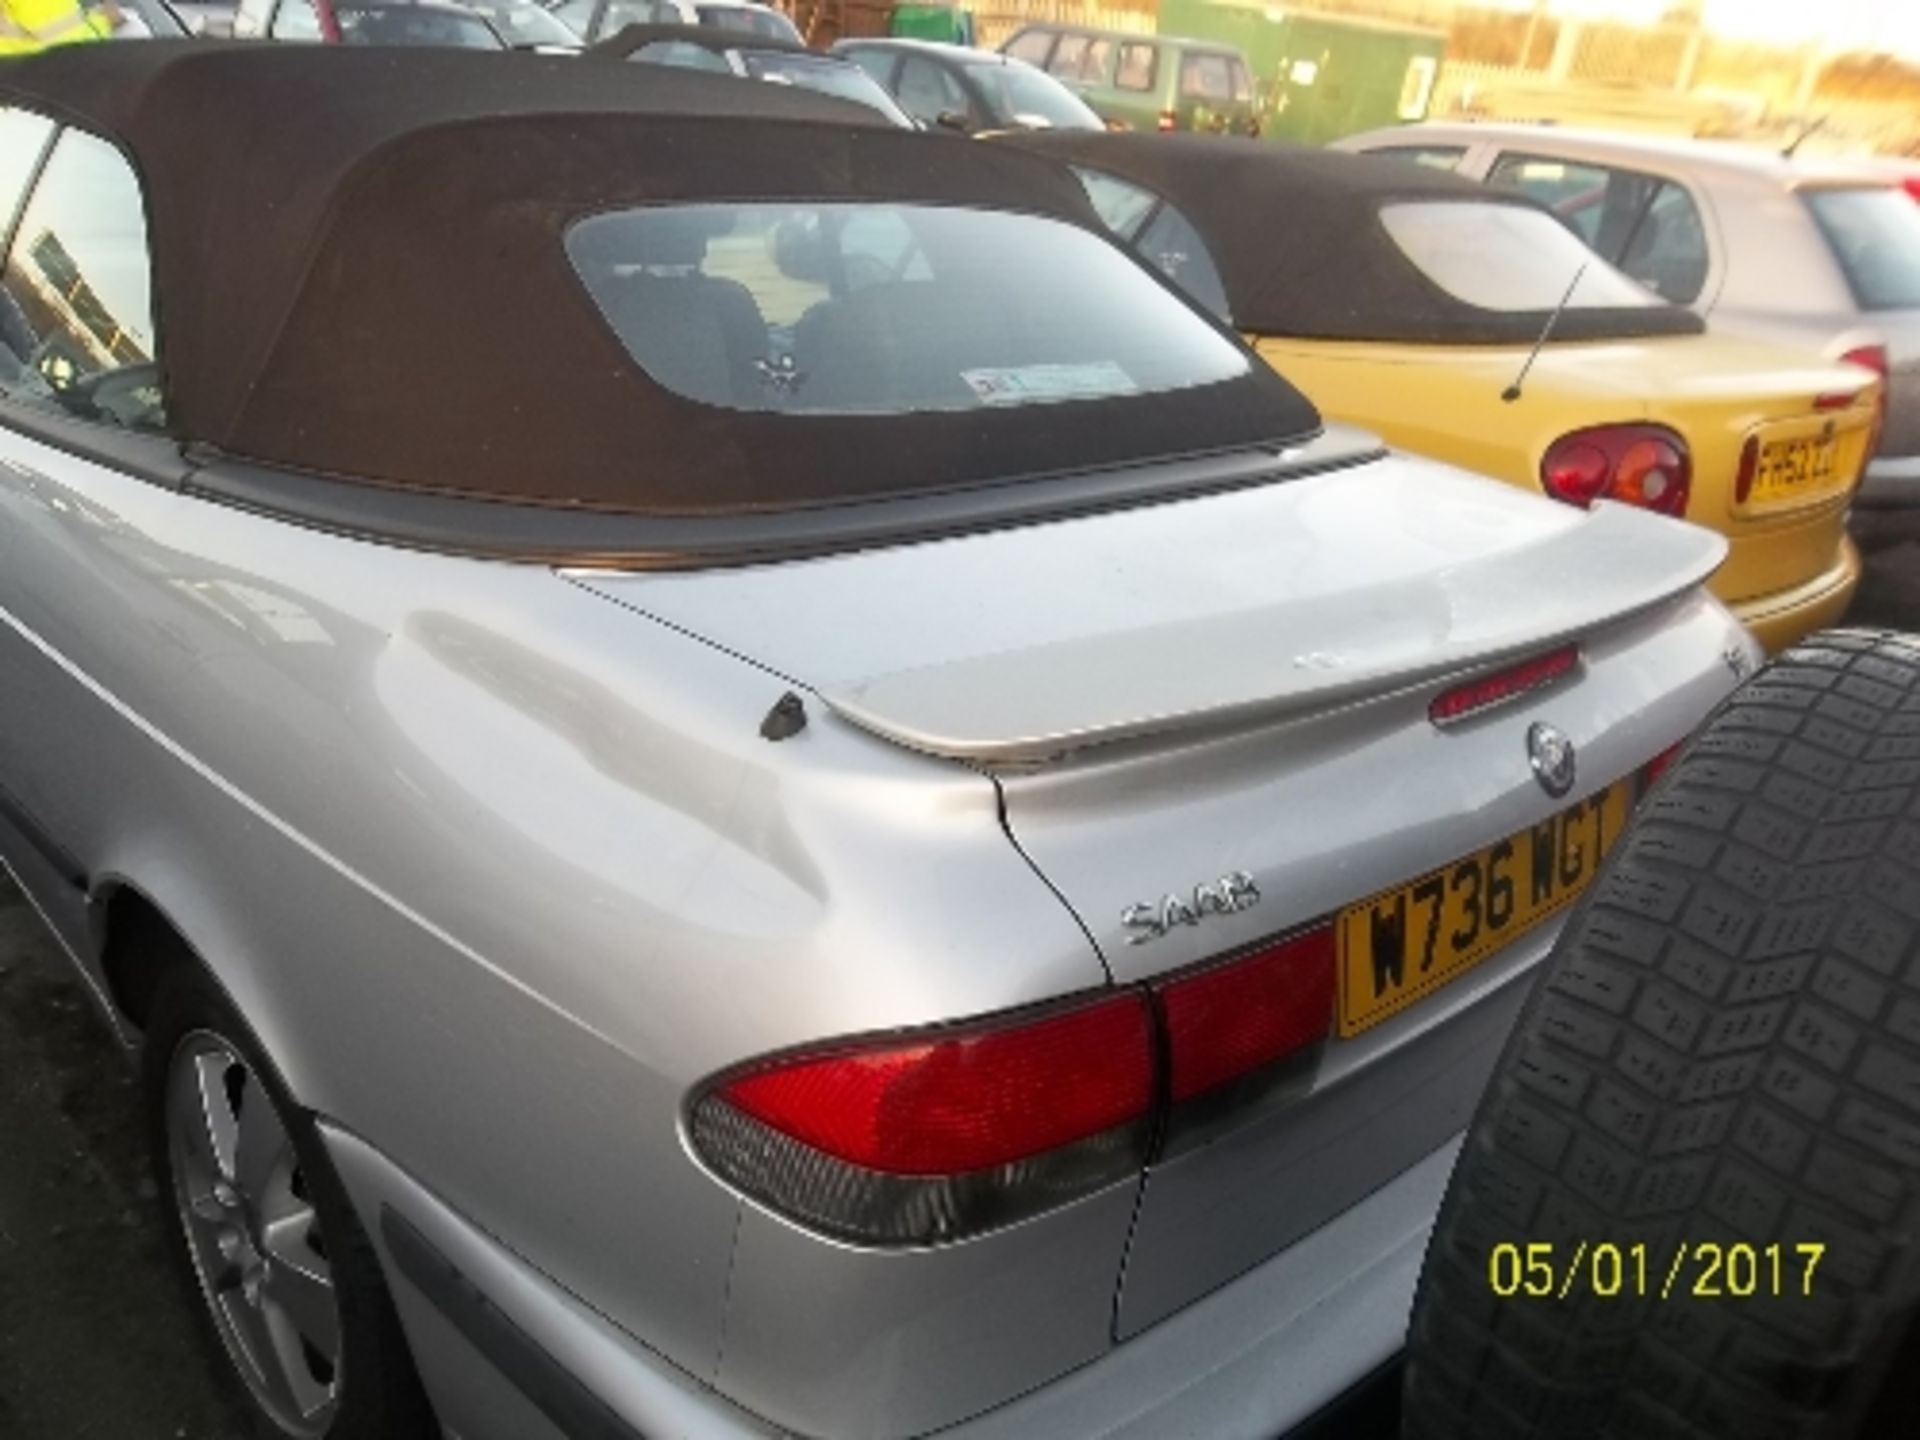 Saab 9-3 SE Turbo convertible - W736 WGT Date of registration: 27.06.2000 1985cc, petrol, 4 speed - Image 3 of 4